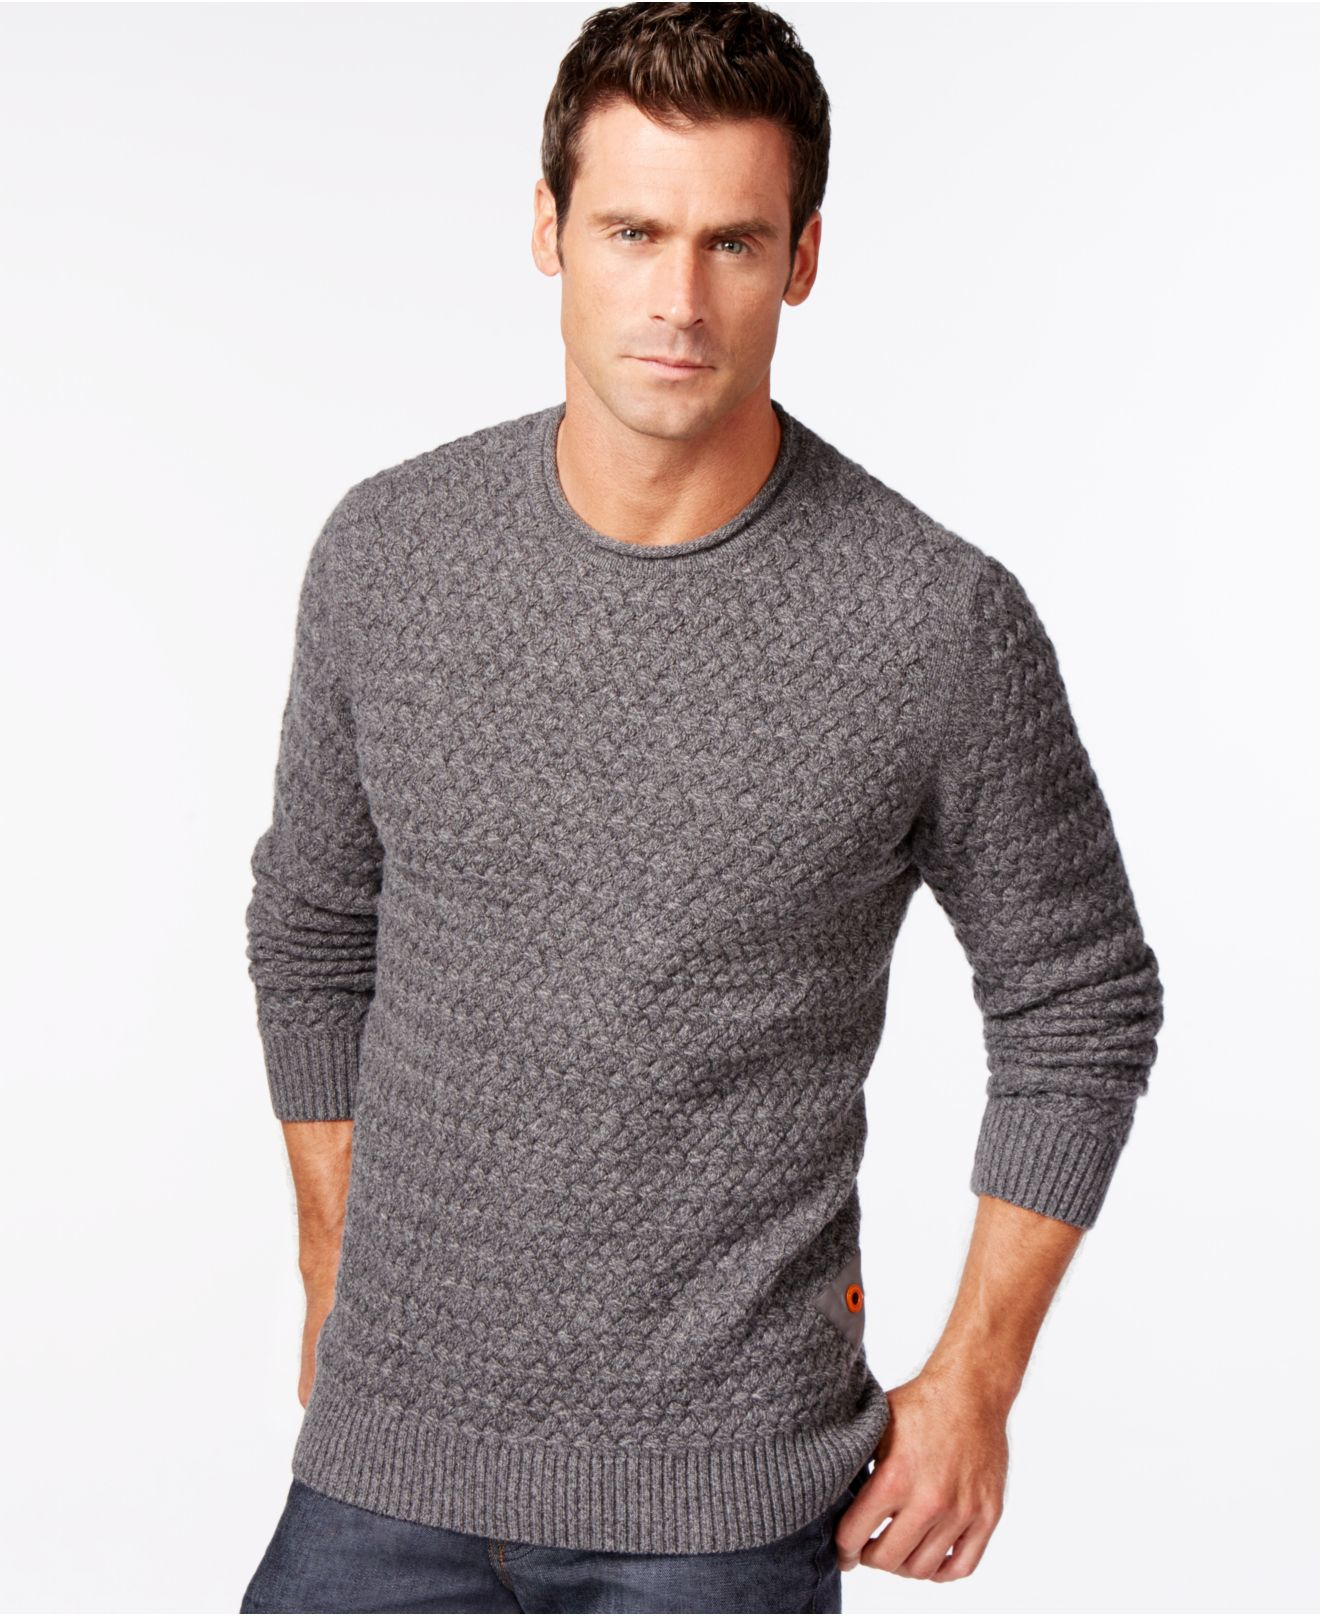 Barbour Copeland Marled Crew-neck Sweater in Gray for Men - Lyst